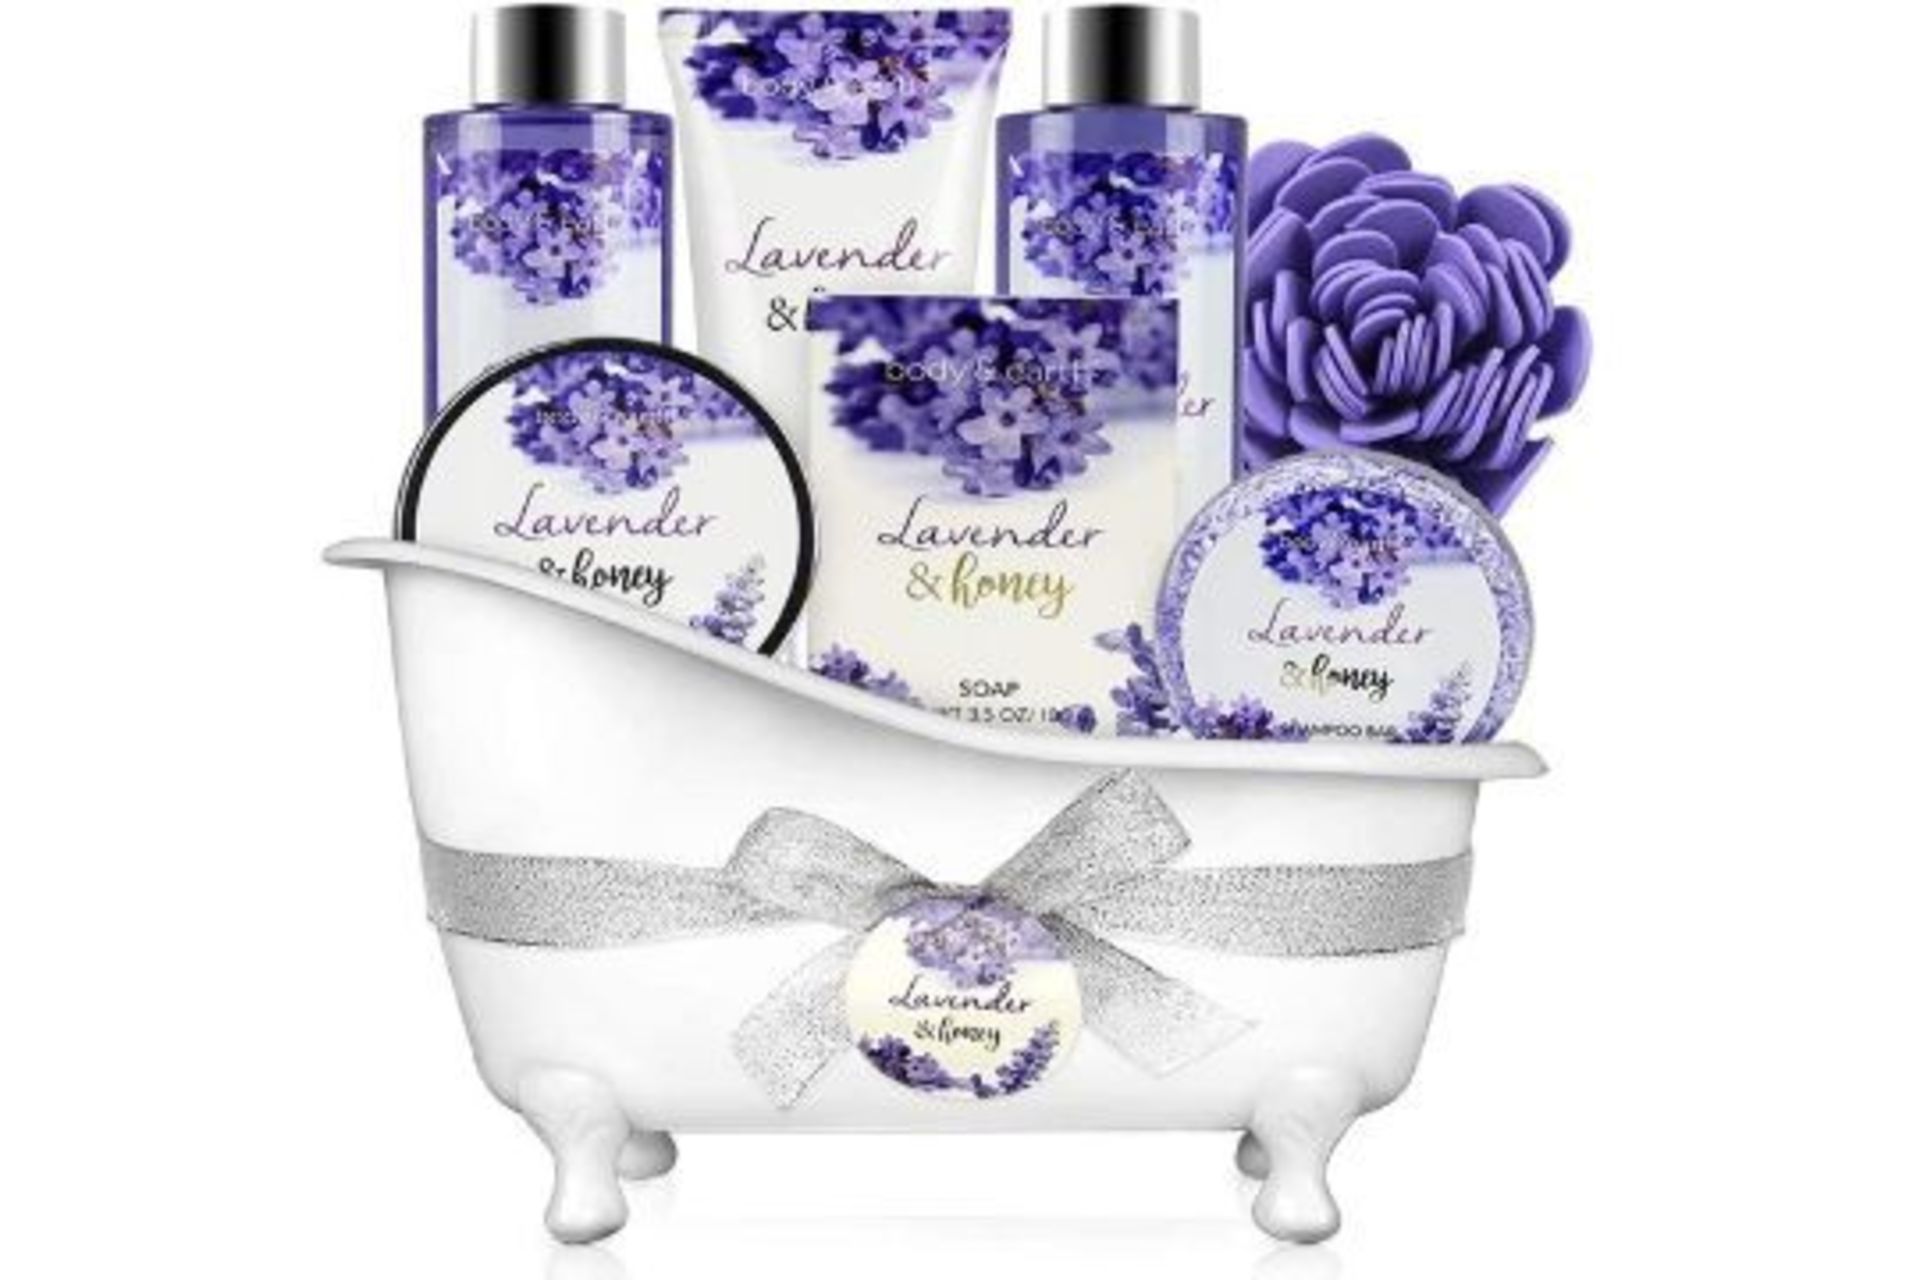 8 X NEW PACKAGED BODY & EARTH Lavender & Honey Spa Bathtub Set. (AMABE-3-1) Contents: This bath